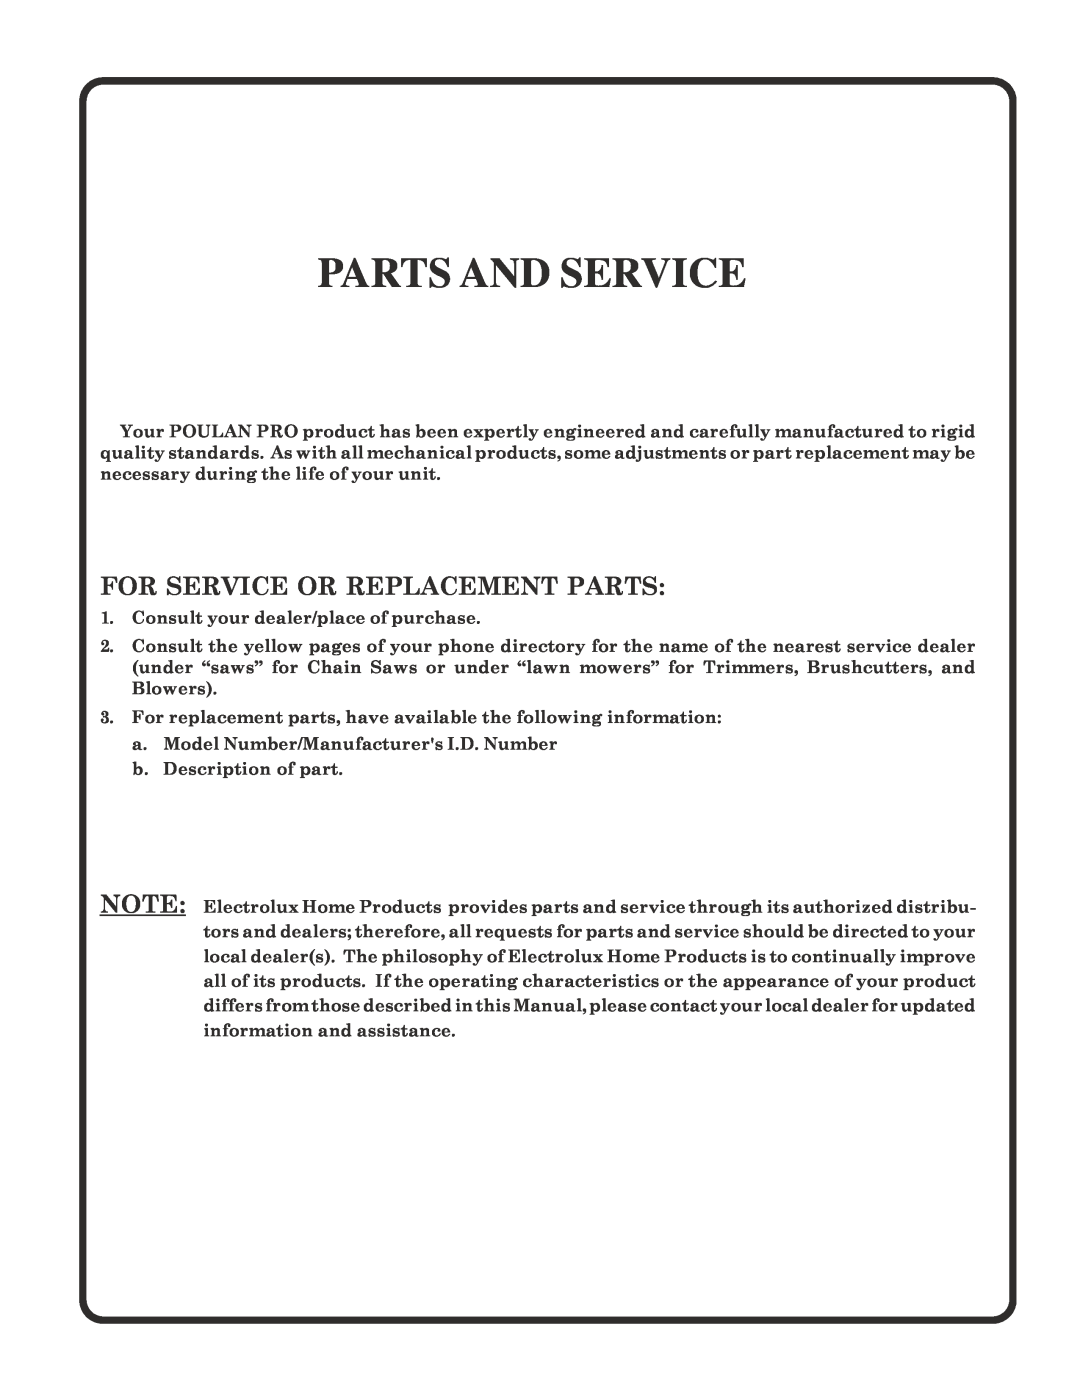 Poulan PR1842STD owner manual Parts And Service, For Service Or Replacement Parts 